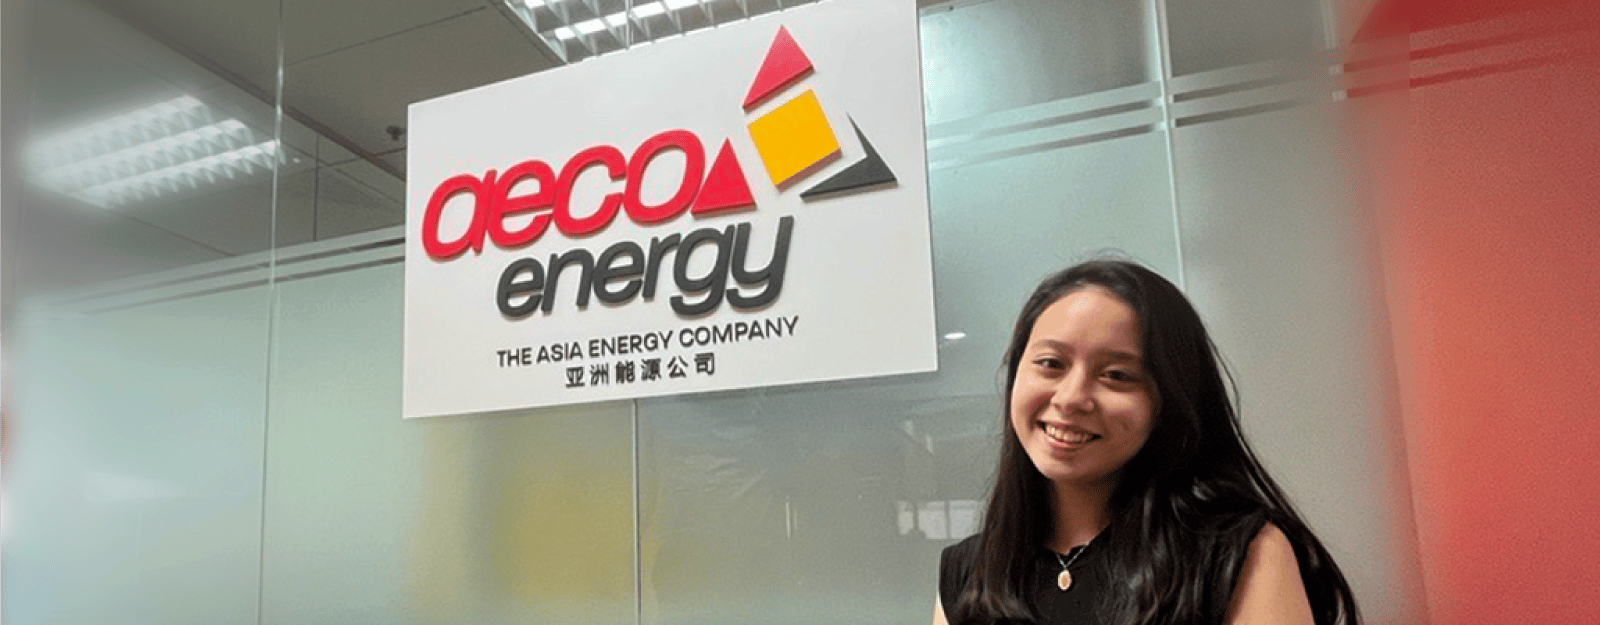 Building a brighter future: Meet Carys, AECO Energy’s 2021 intern